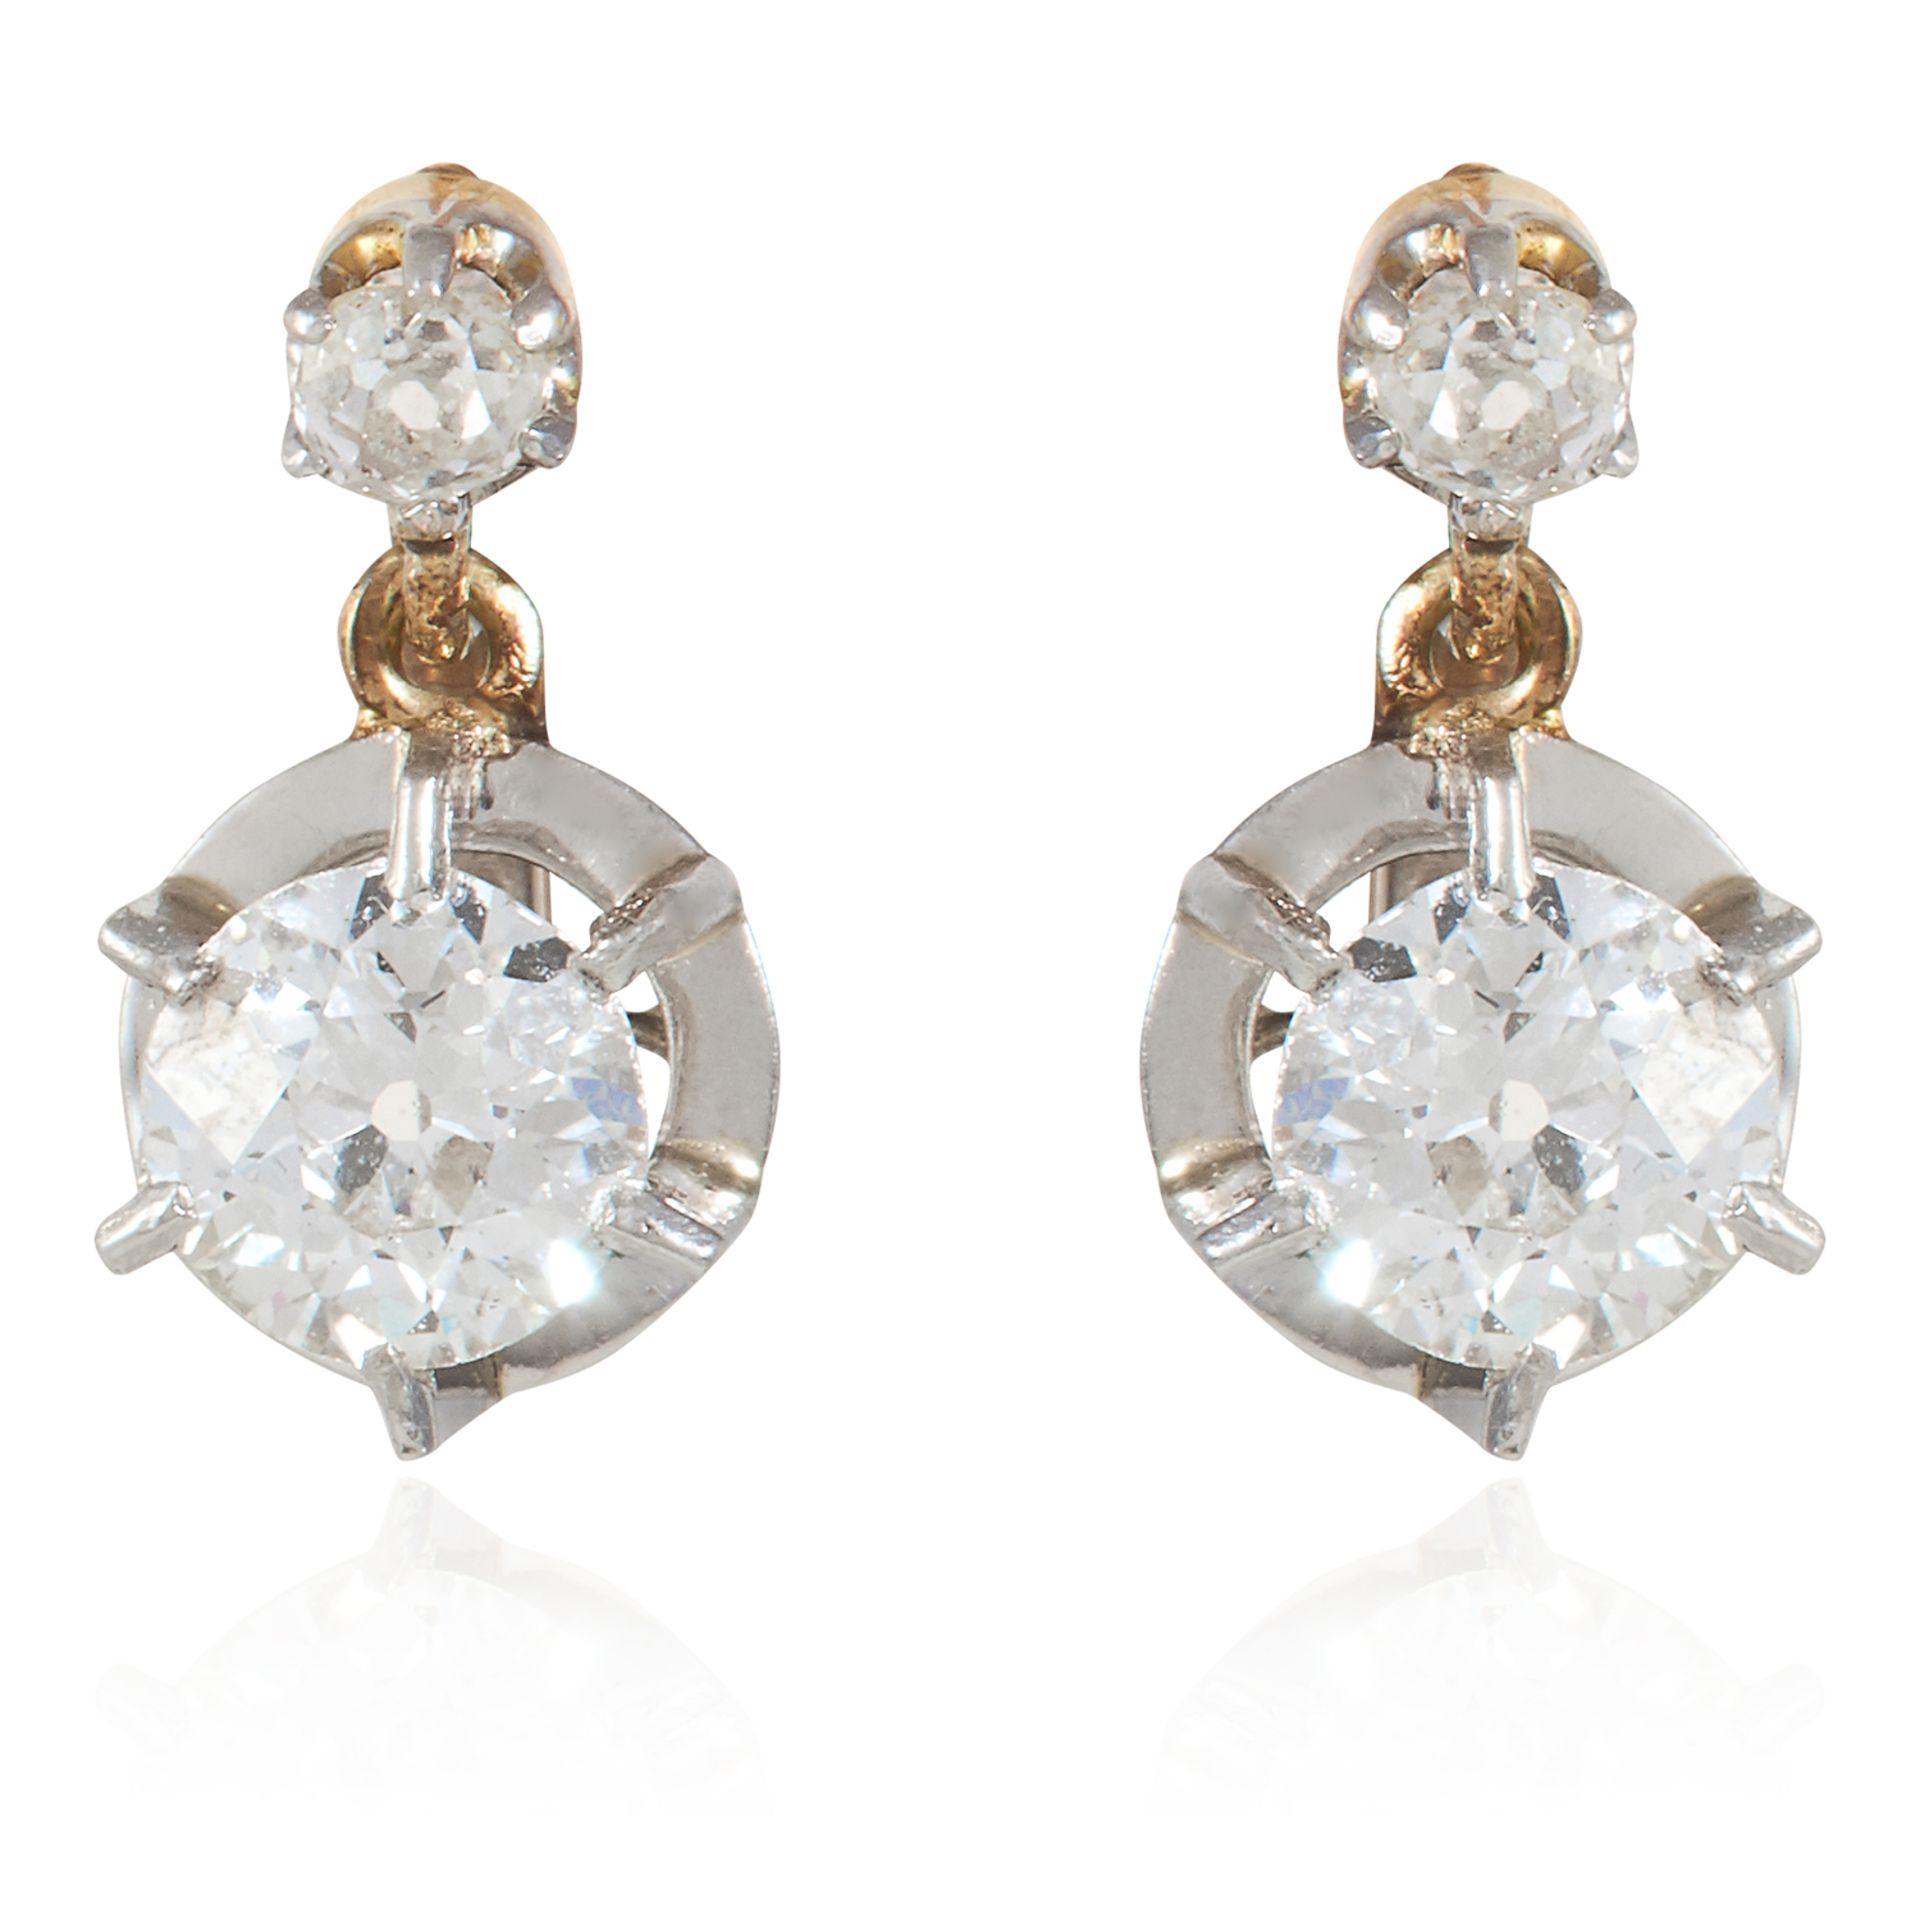 A PAIR OF ANTIQUE DIAMOND EARRINGS in high carat yellow gold, comprising of a rose and old cut